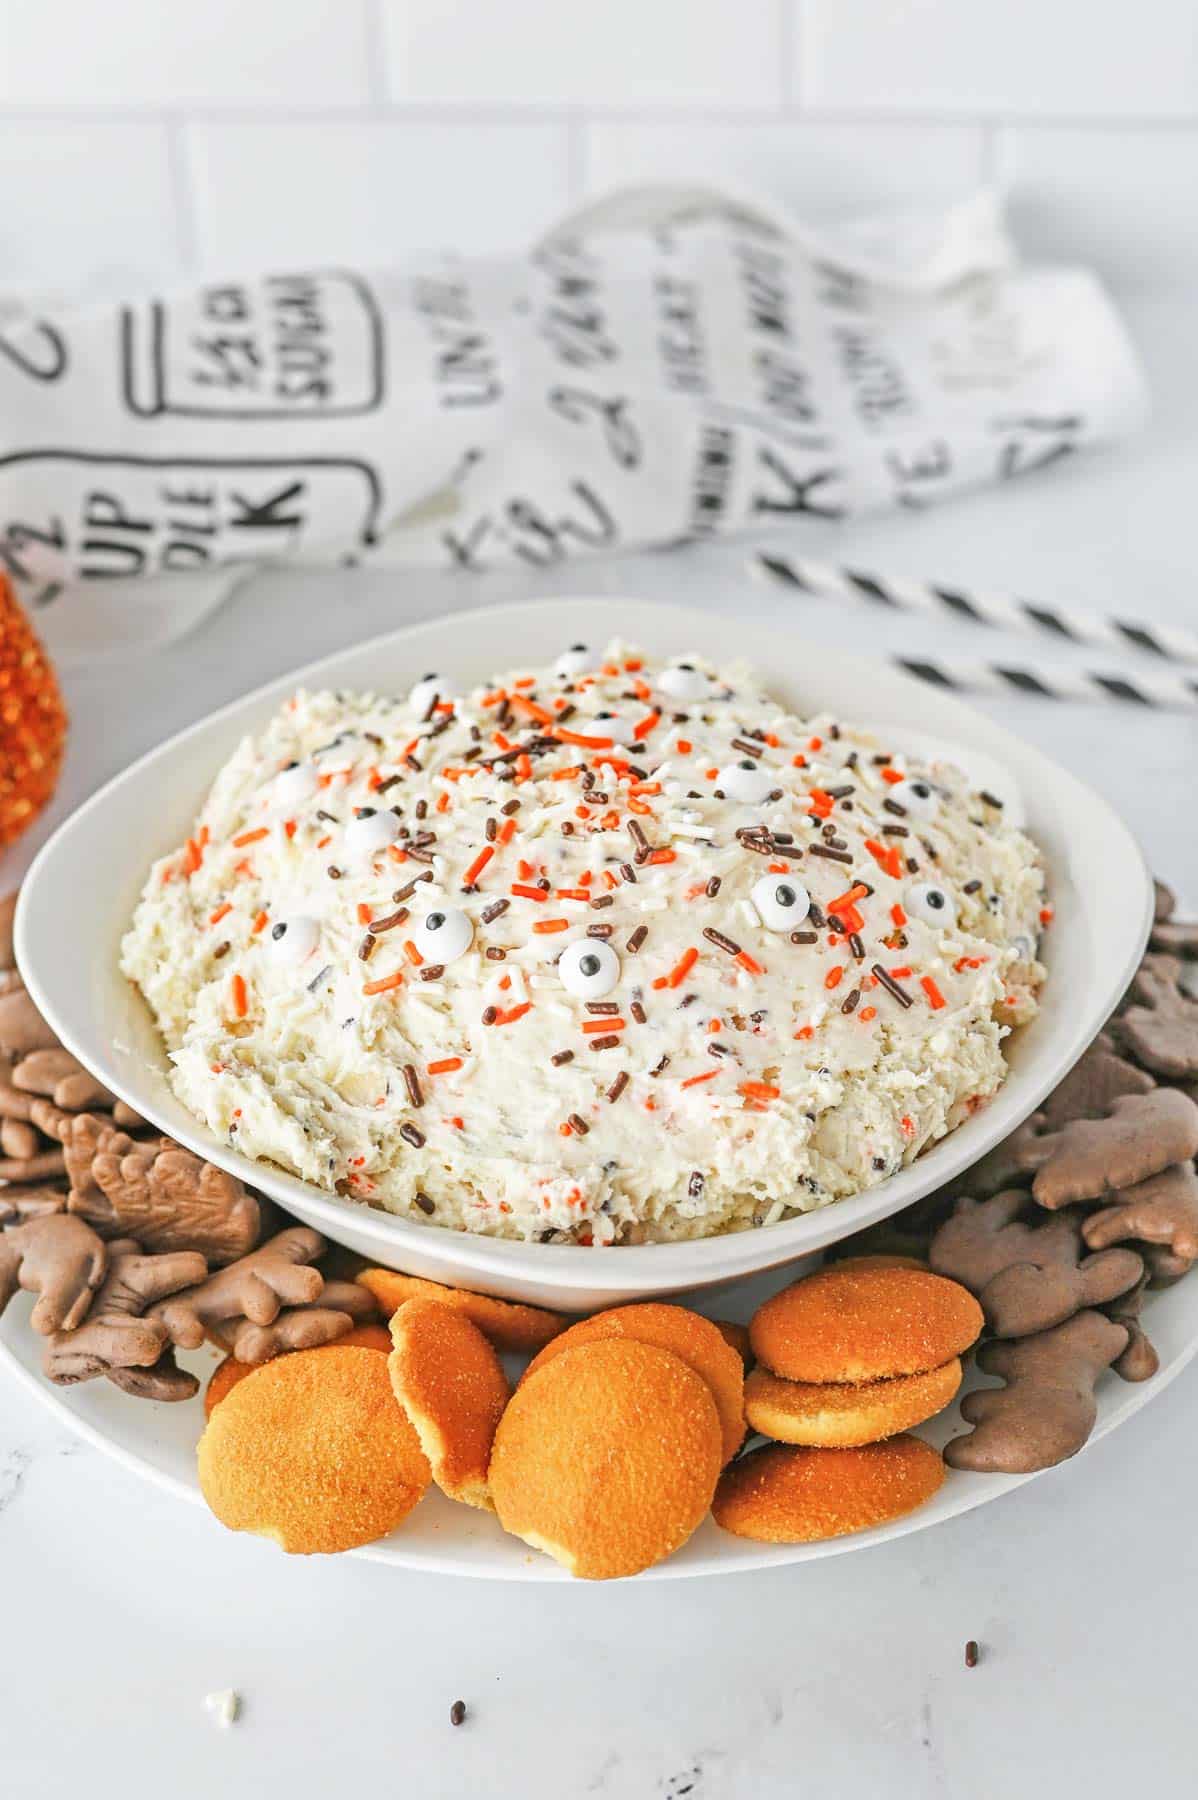 A bowl of halloween dessert dip with choclate animal crackers and vanilla wafers.